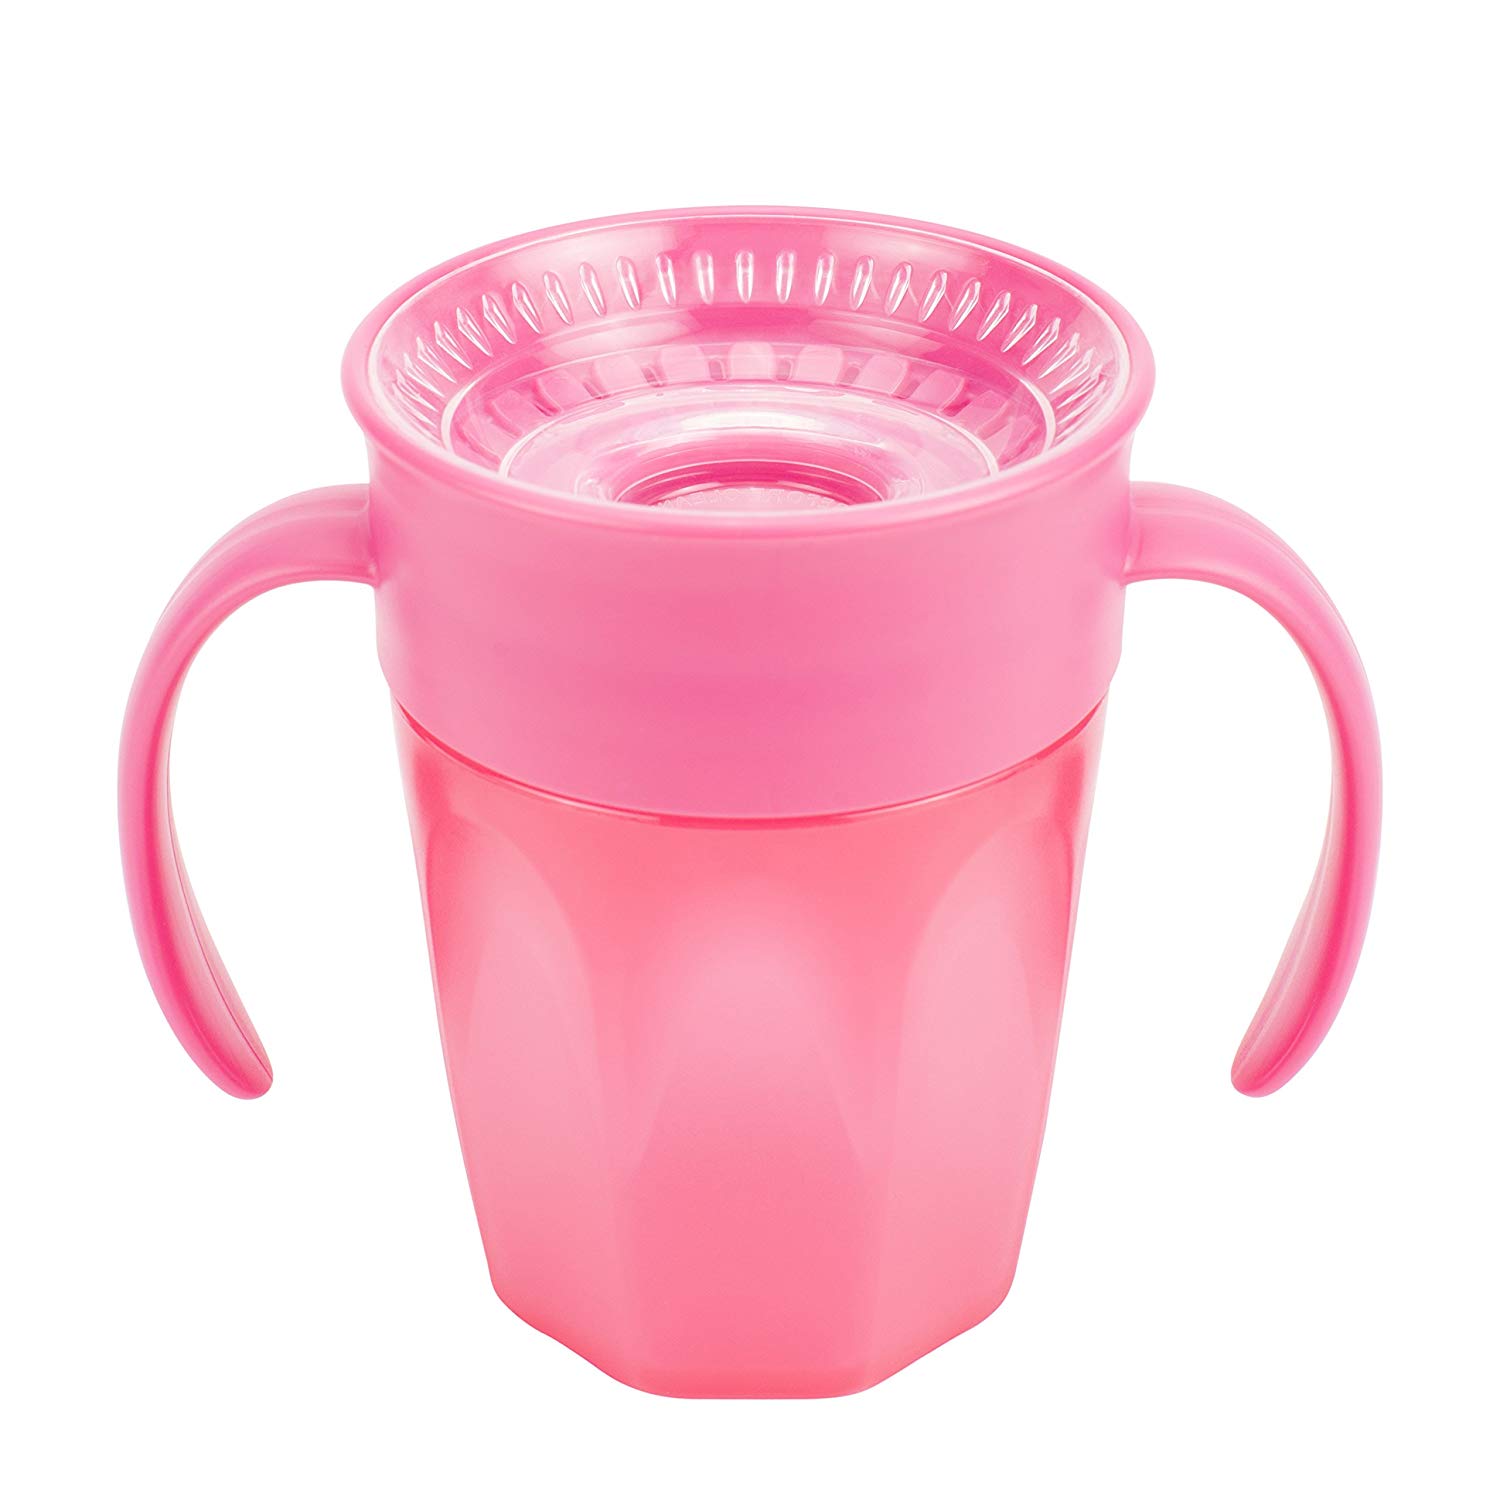 Dr Browns 6oz/180ml Soft Spout Transition Cup w/handle + 9oz/270ml Baby First Straw Cup w/handle + 7oz/200ml Cheers 360 Cup with Handle (1-pack)